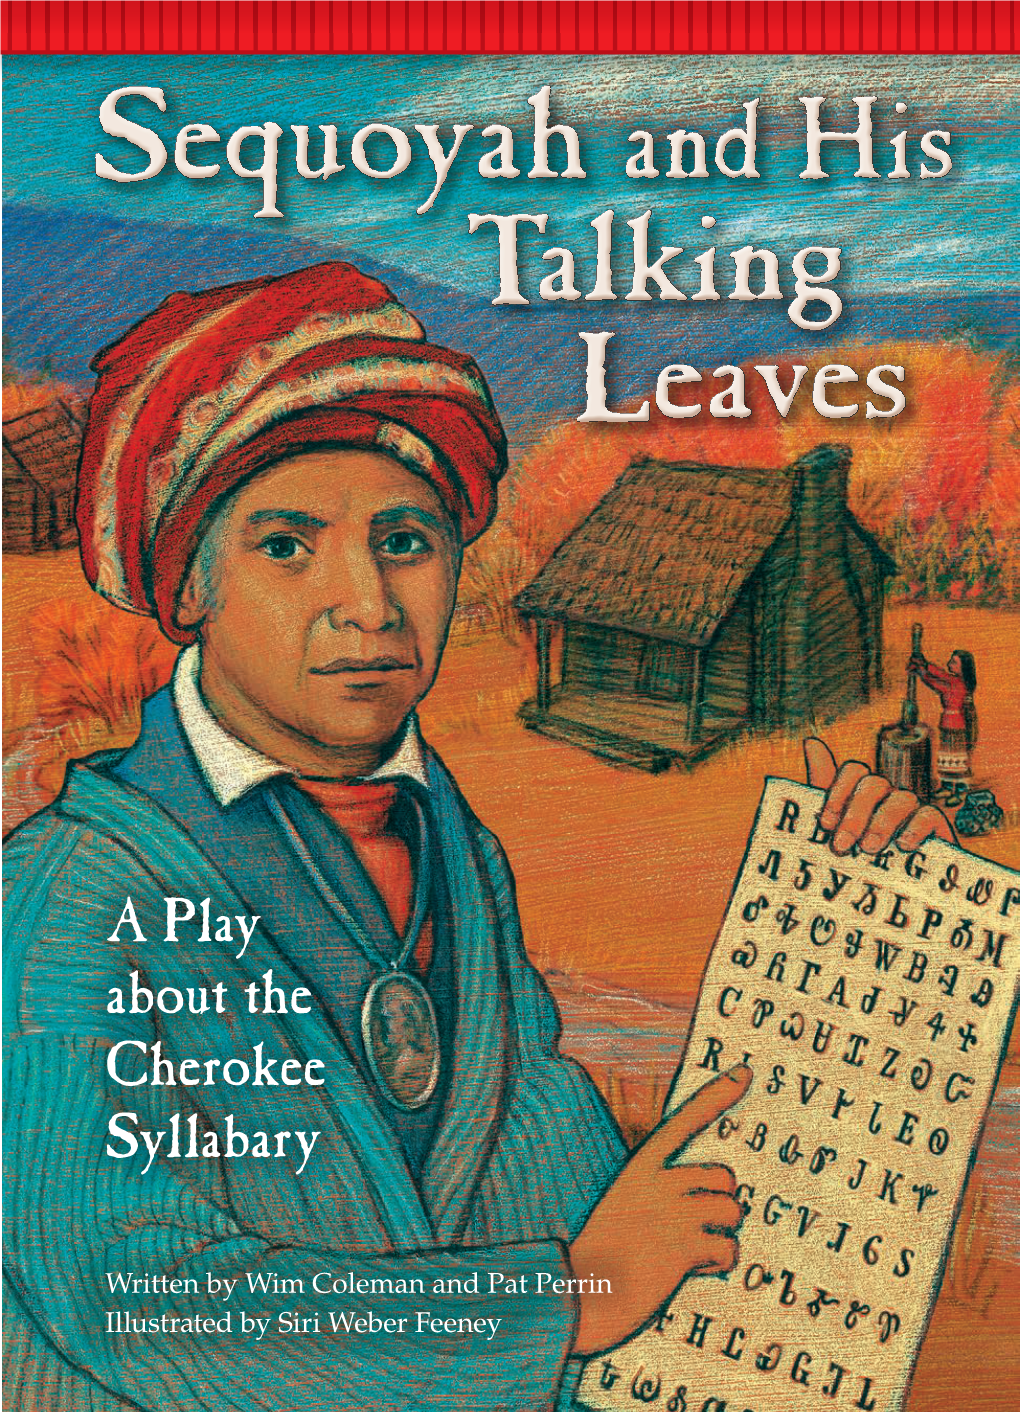 A Play About the Cherokee Syllabary